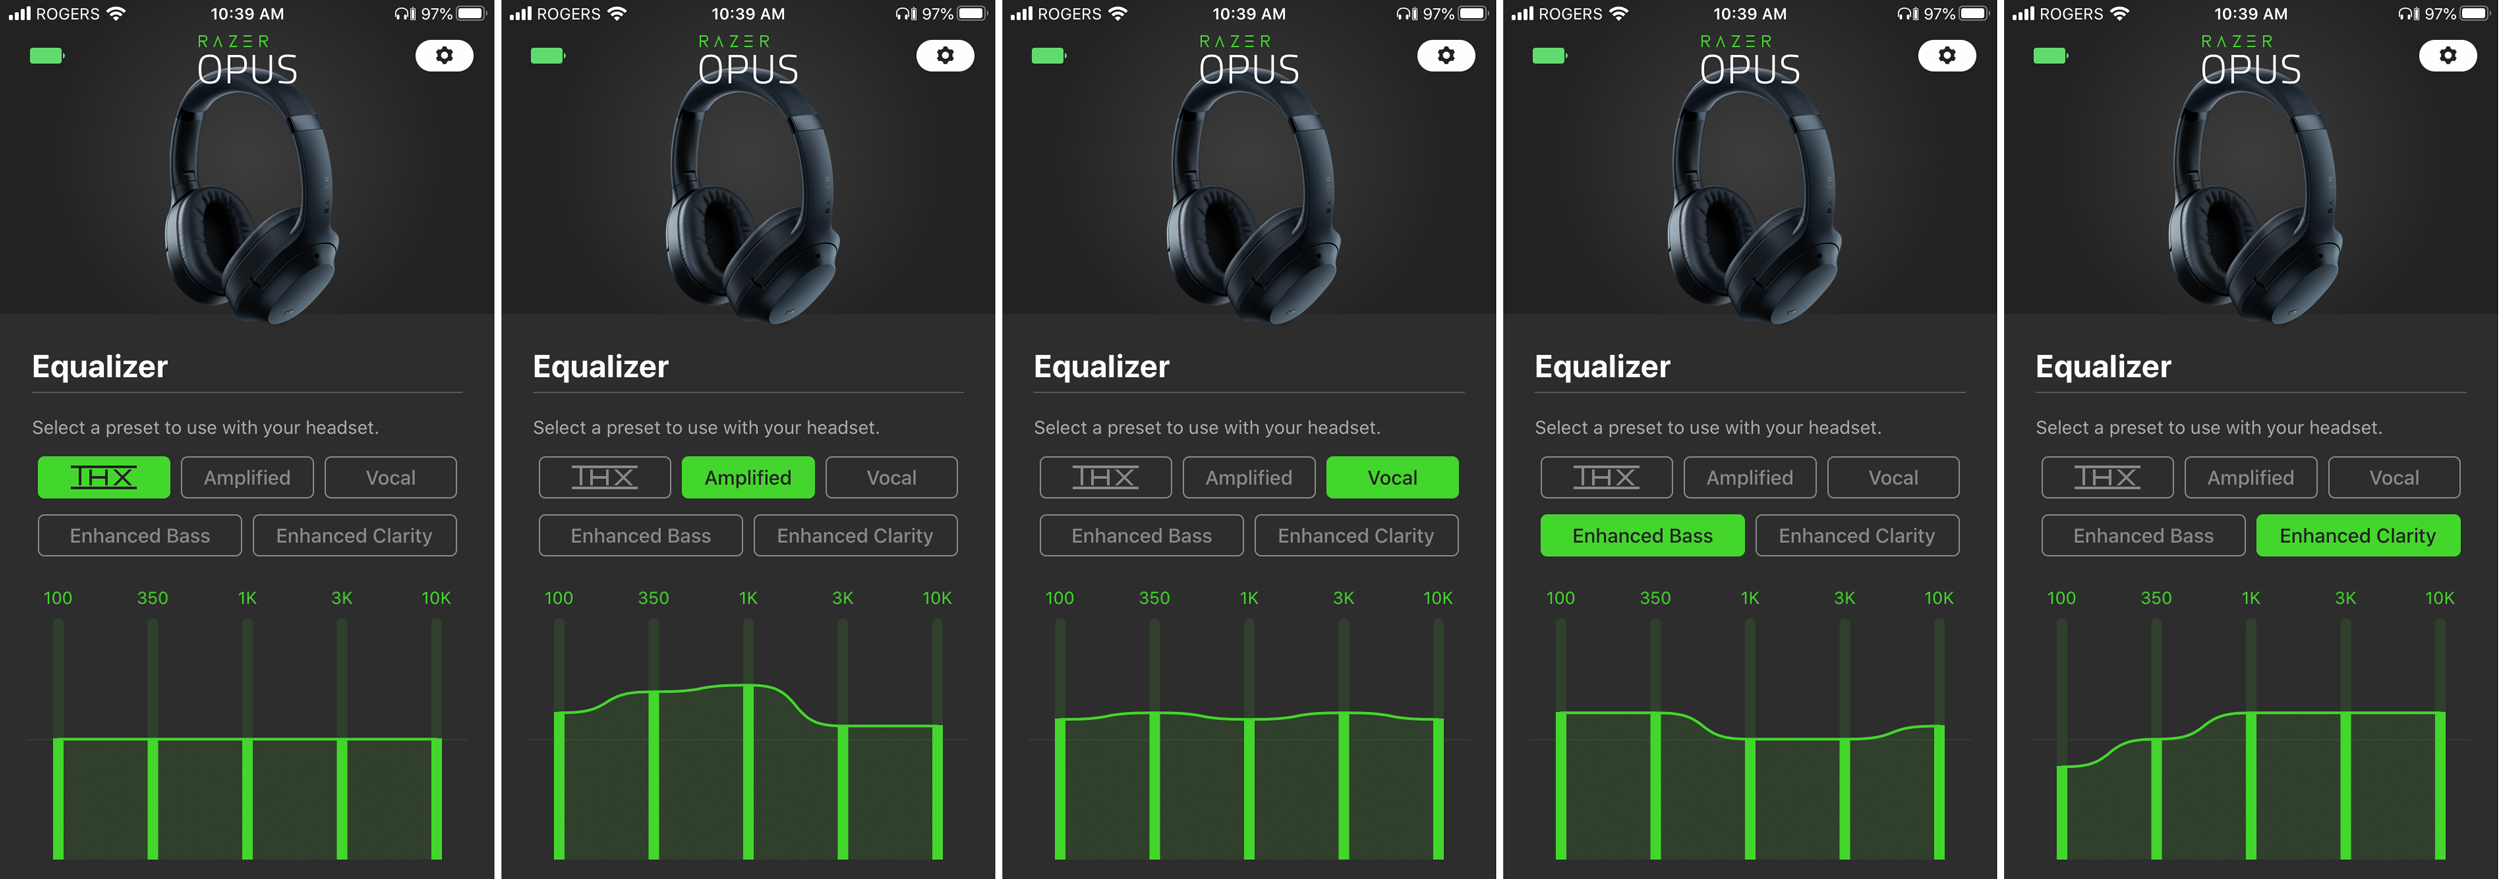 The Razer Opus mobile app is very limited, allowing users to select from just five equaliser presets. (Photo: Andrew Liszewski)